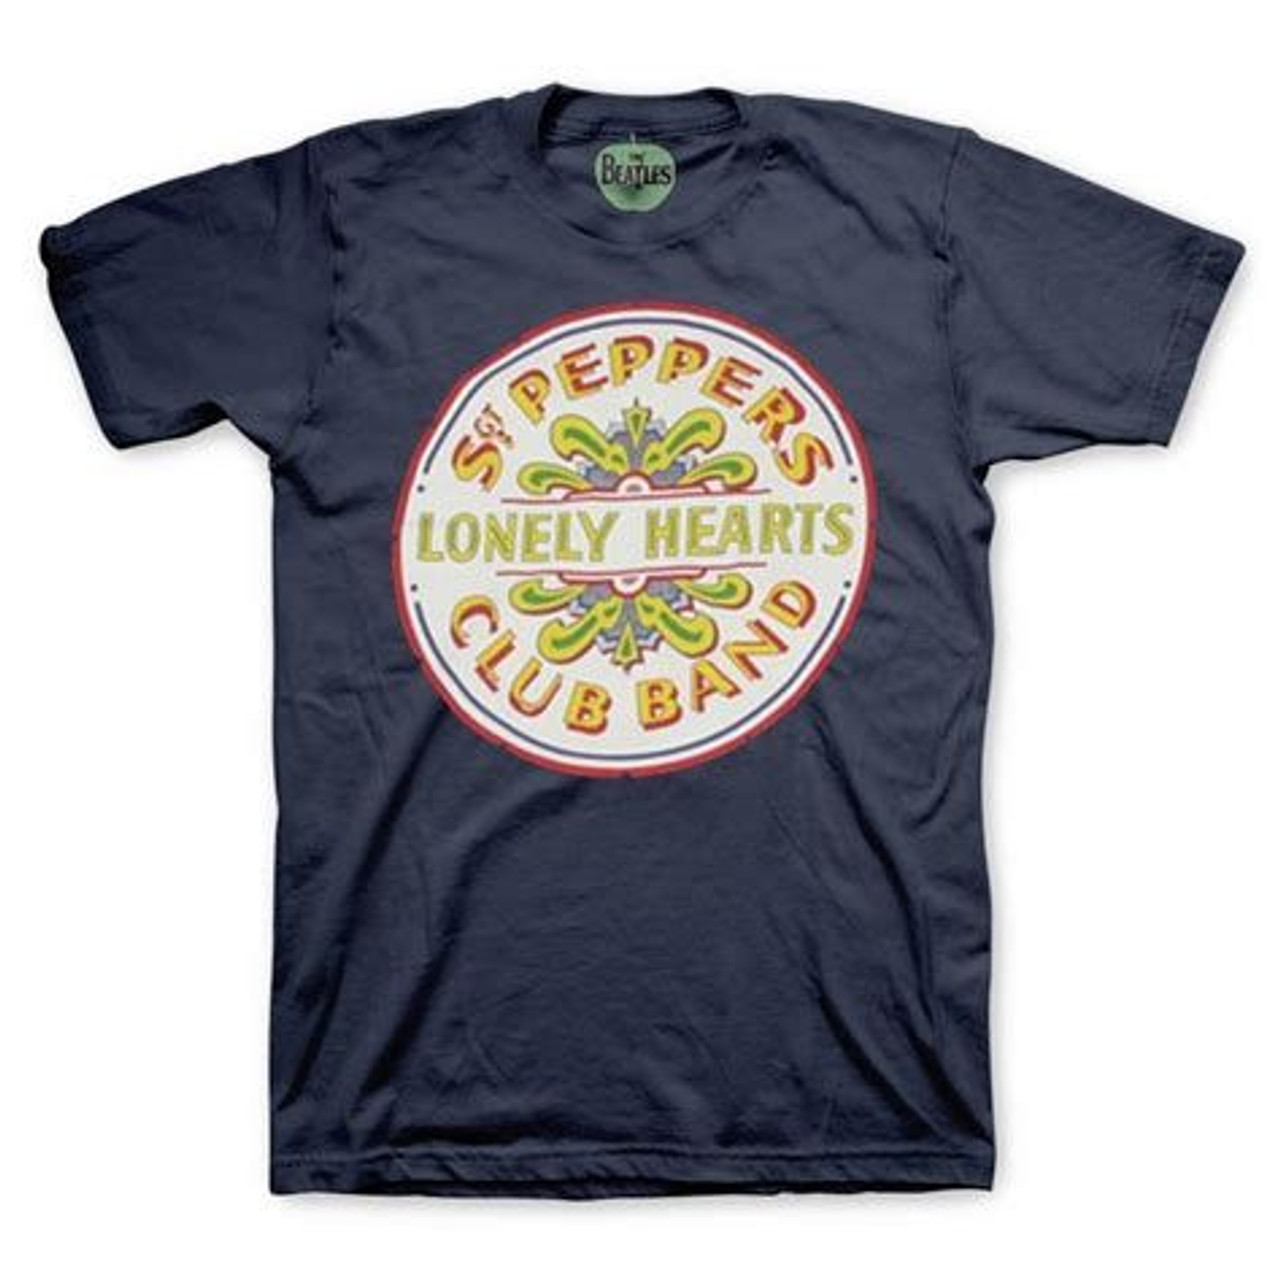 Buy Band The Sgt. design Beatles | Peppers T-shirt Vintage Seal Tees